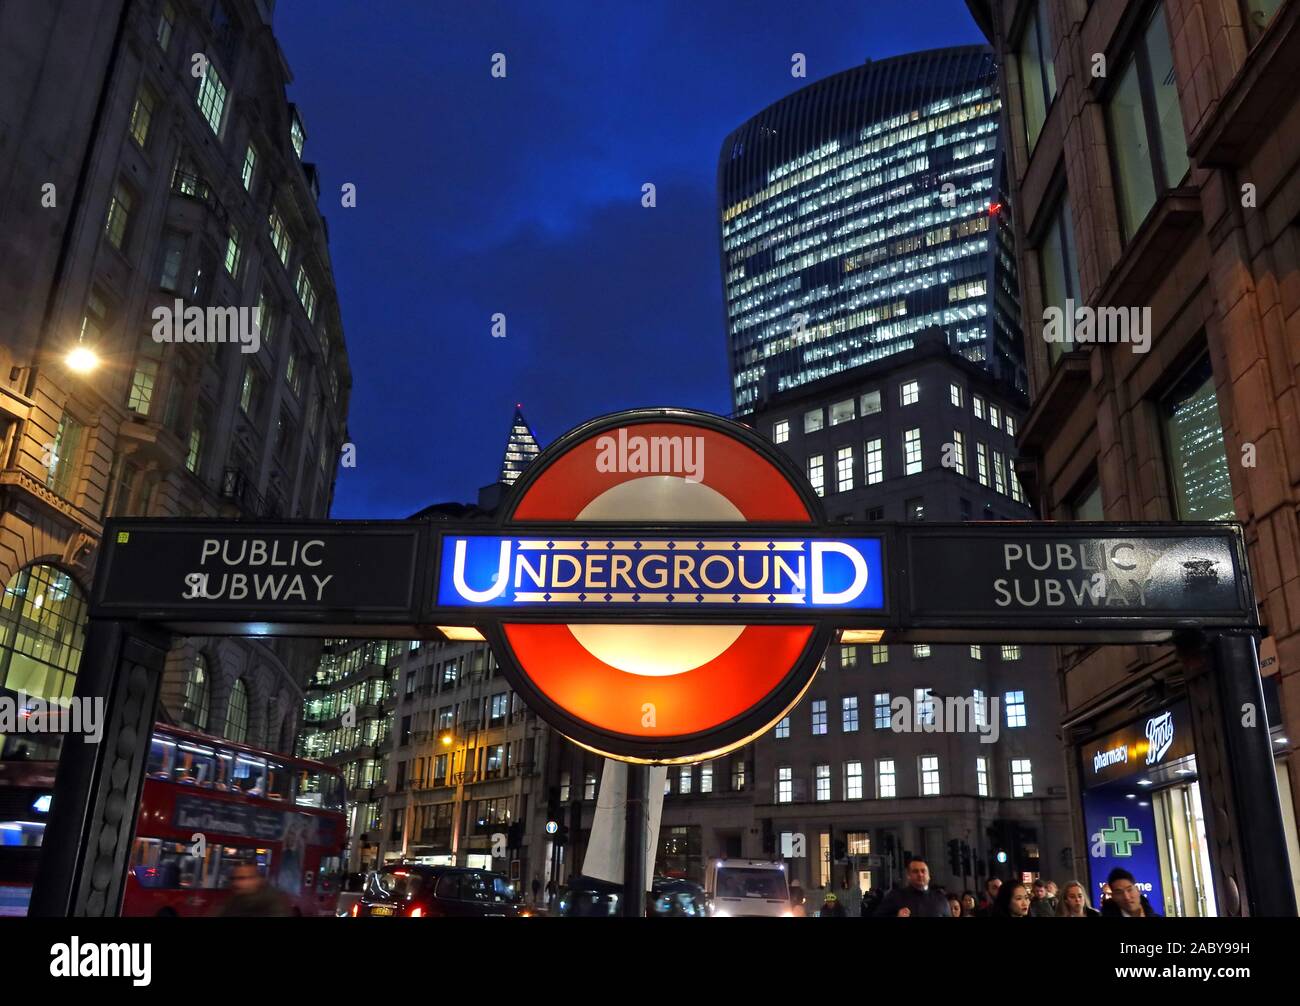 Old style TfL London Underground sign, at dusk in City of London, Bank tube Station, City of London financial district behind, England, UK Stock Photo